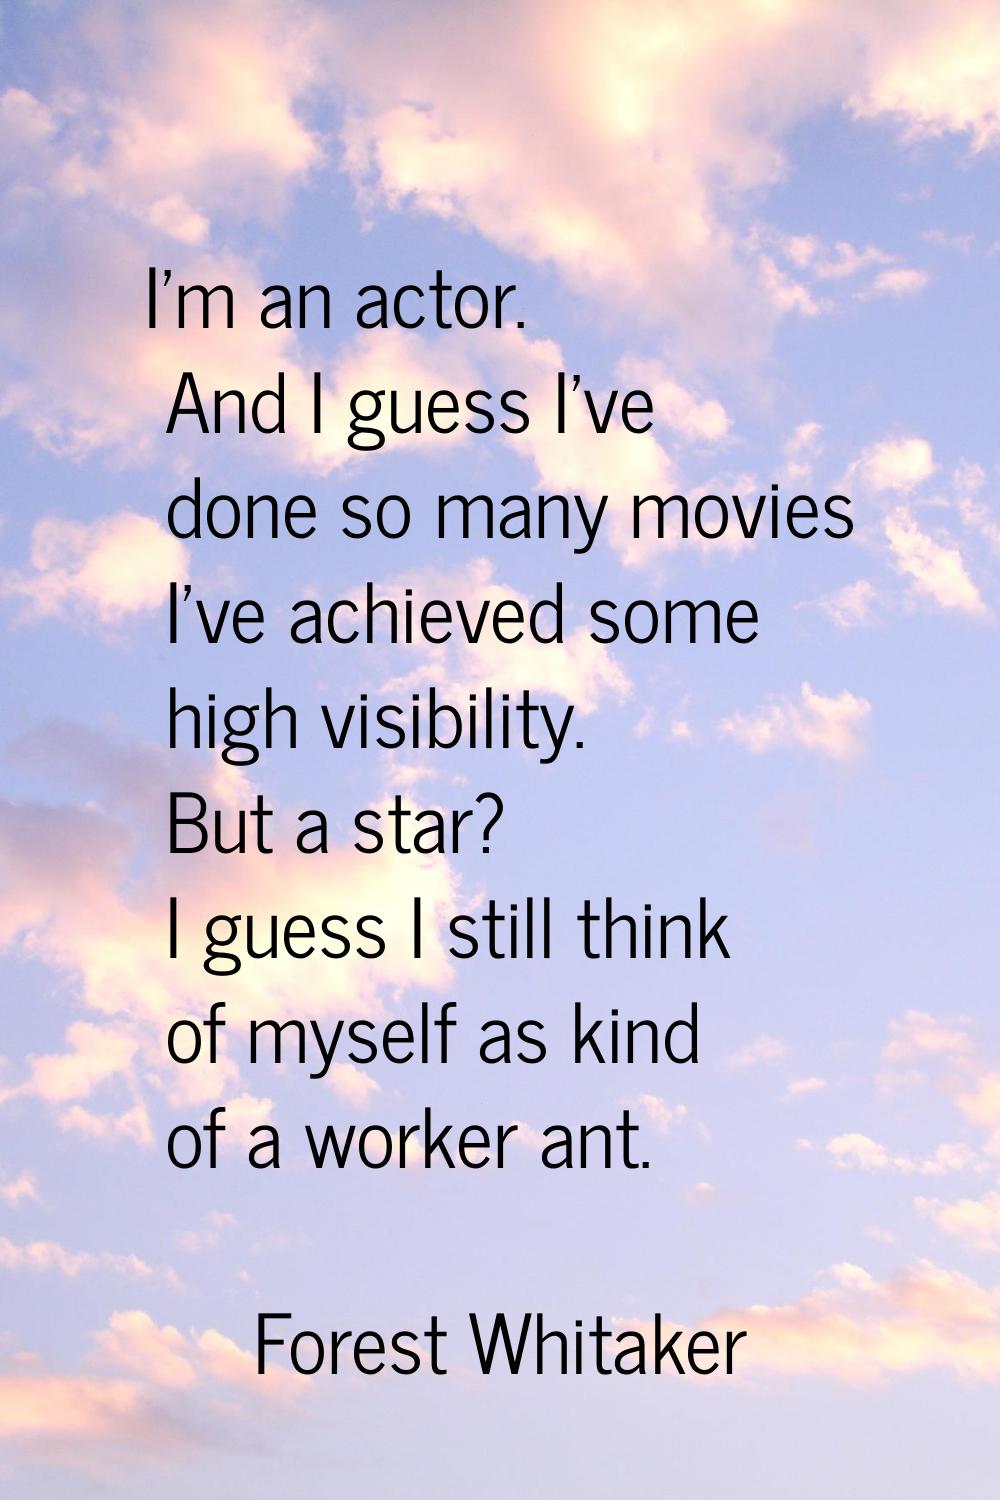 I'm an actor. And I guess I've done so many movies I've achieved some high visibility. But a star? 